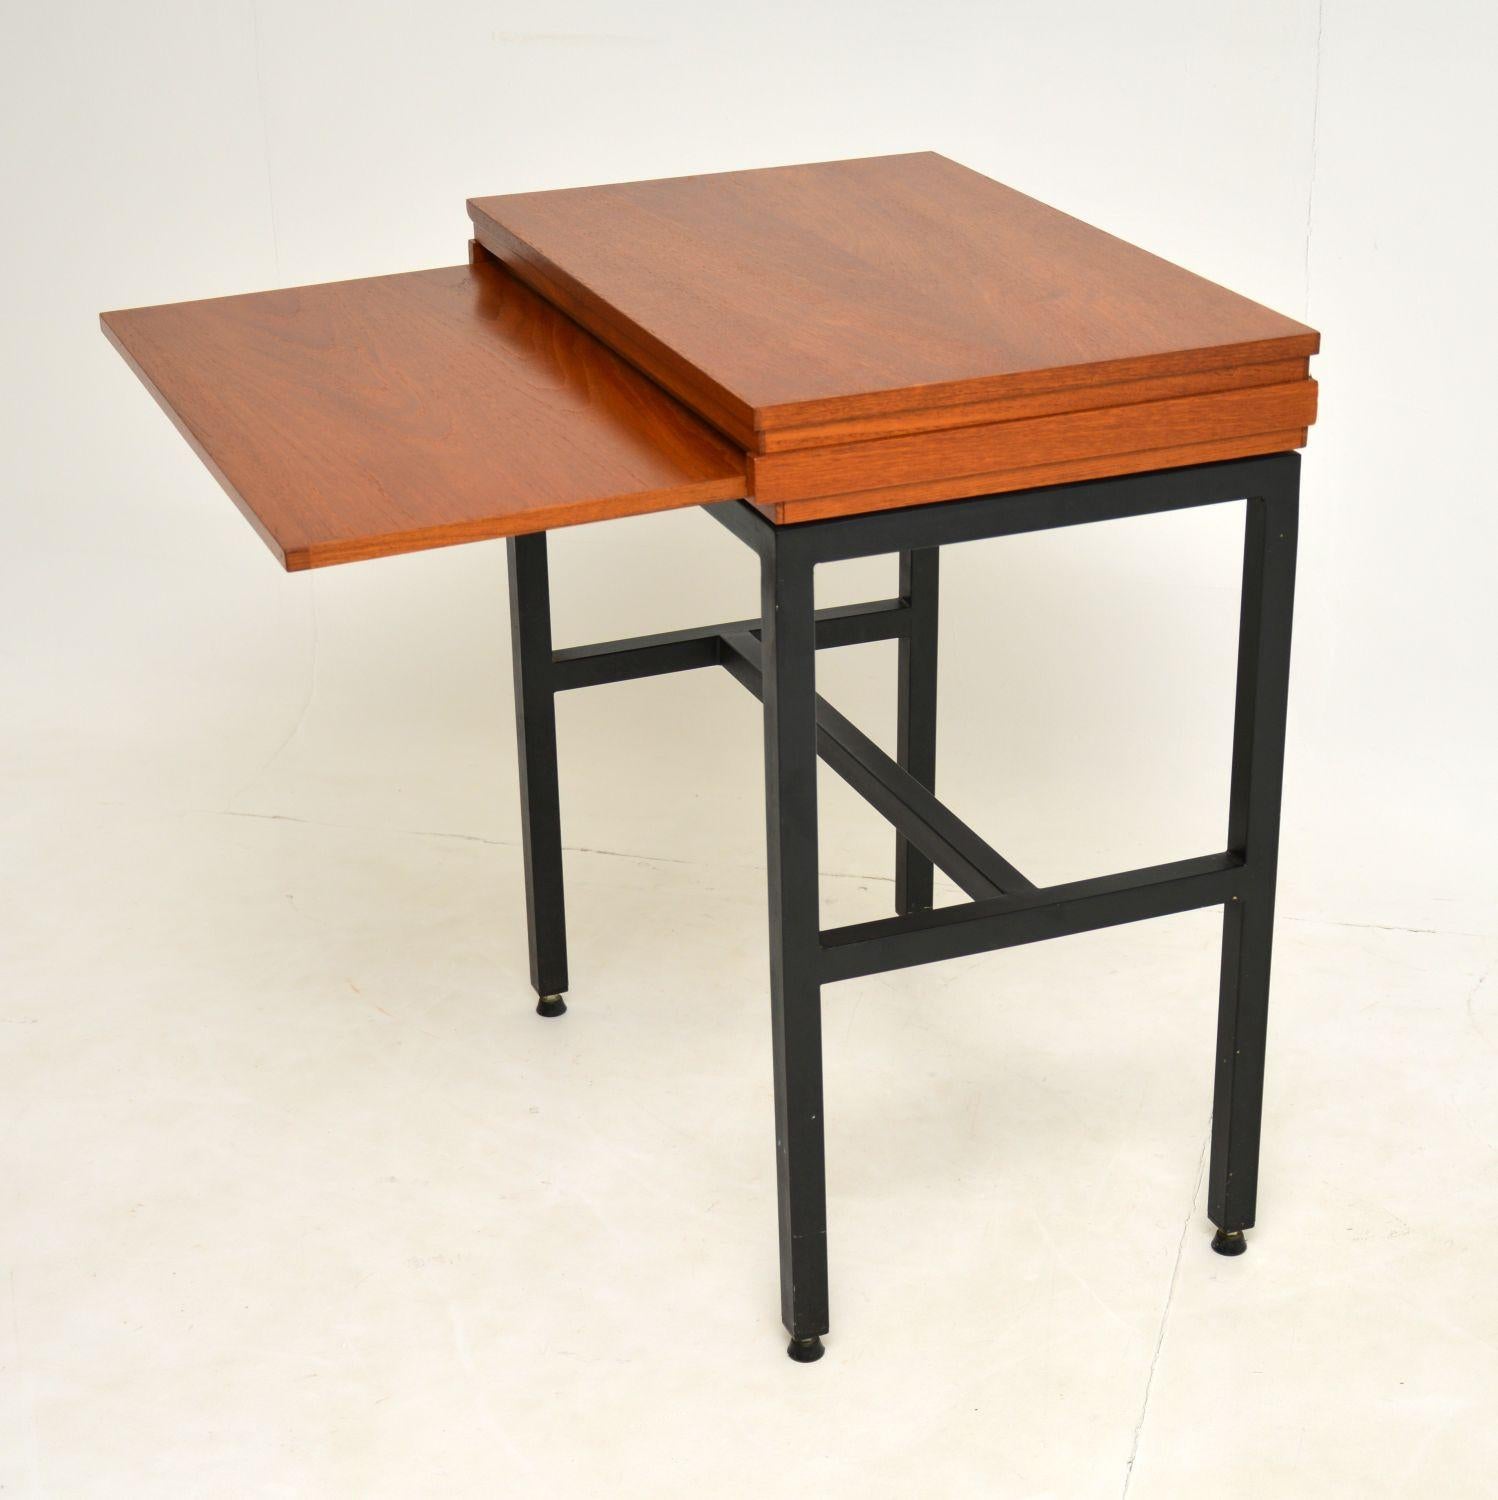 An unusual and stylish side table in teak with an ebonised metal base and pull out writing slide. This was made in England, it dates from the 1960’s.

It is a great size and beautifully finished on all sides, so can be used as a free standing